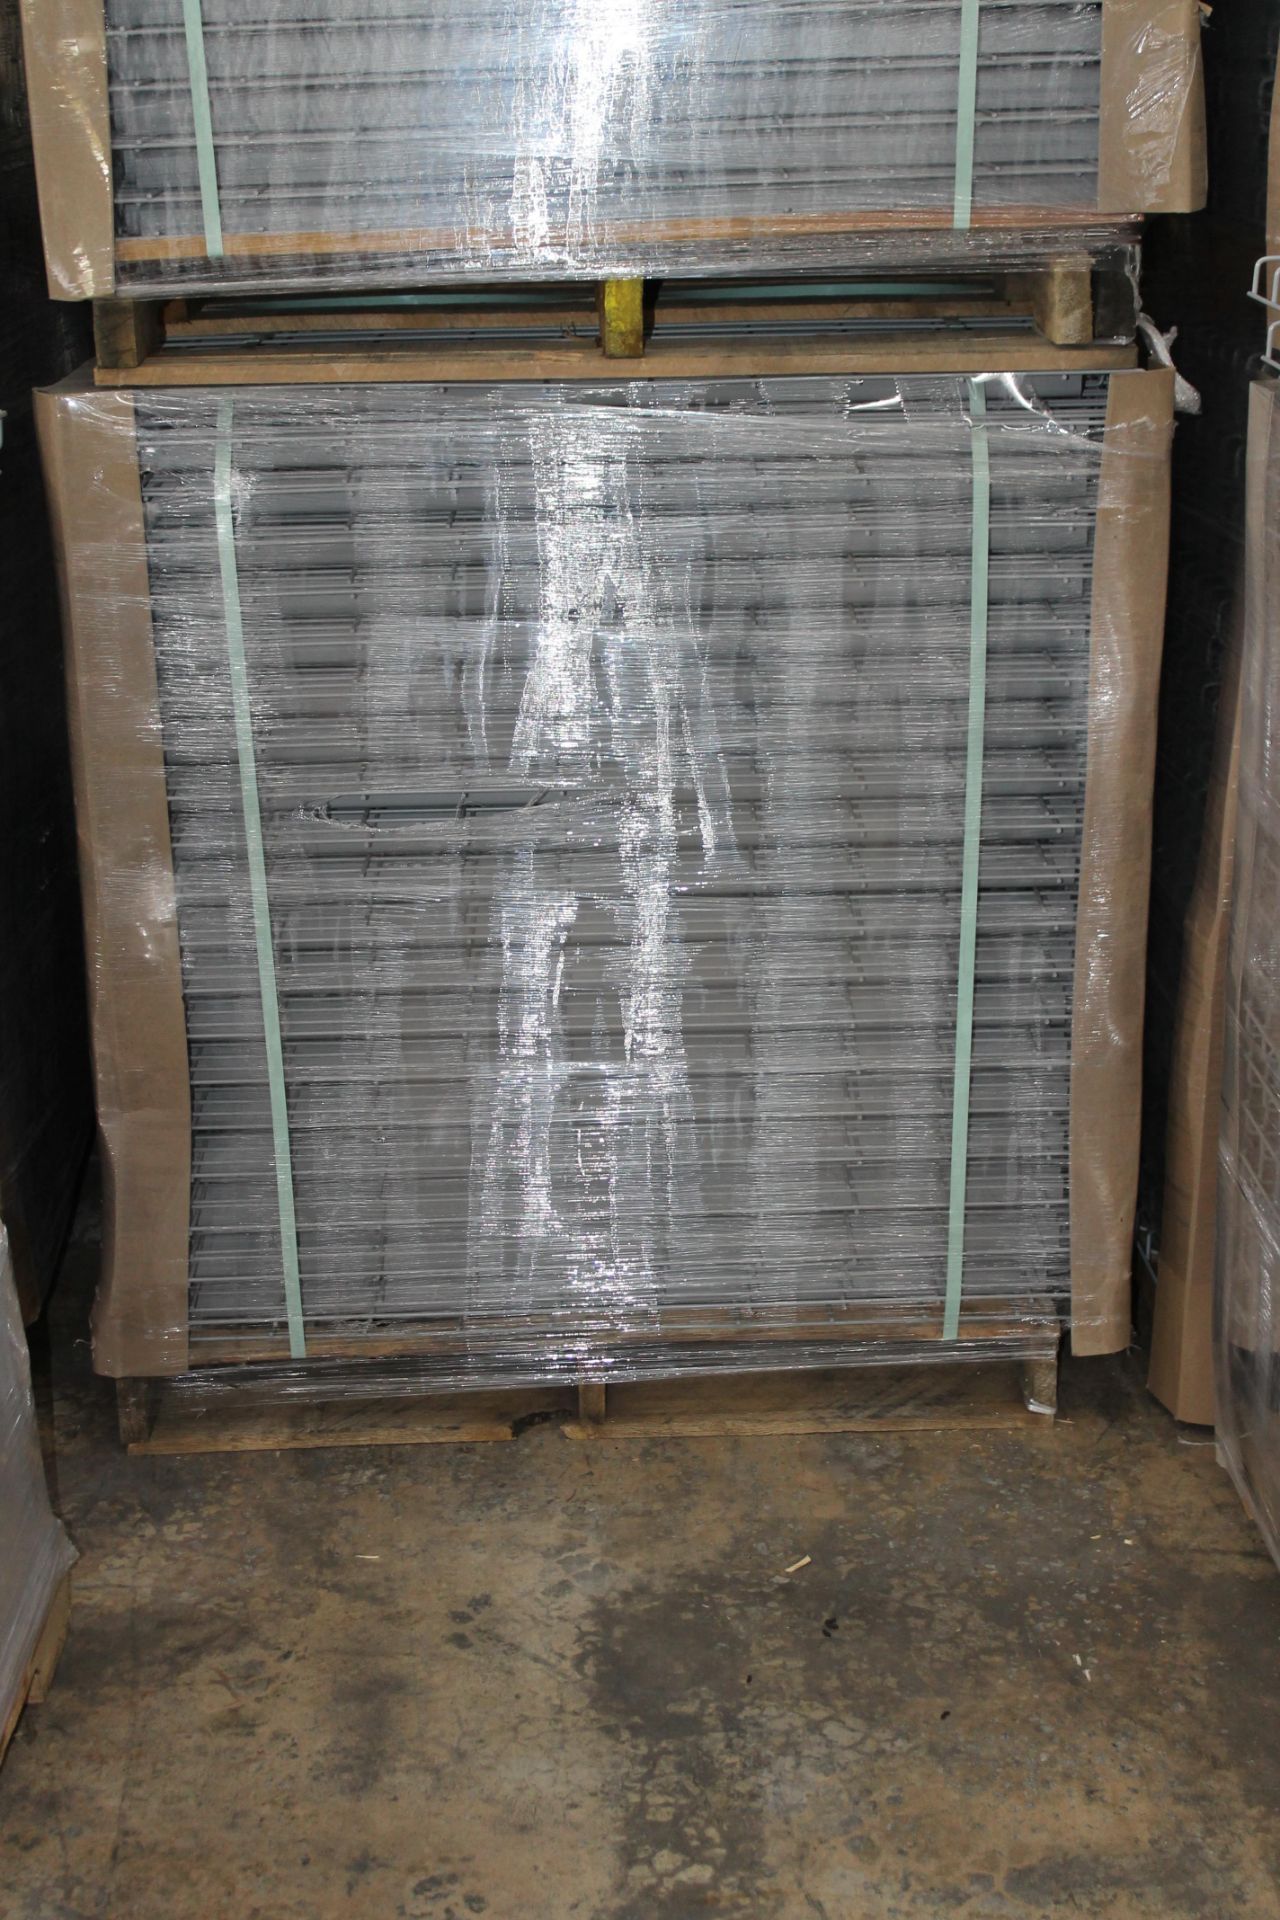 NEW 80 PCS OF STANDARD 48" X 46" WIREDECK - 1900 LBS CAPACITY - Image 2 of 2